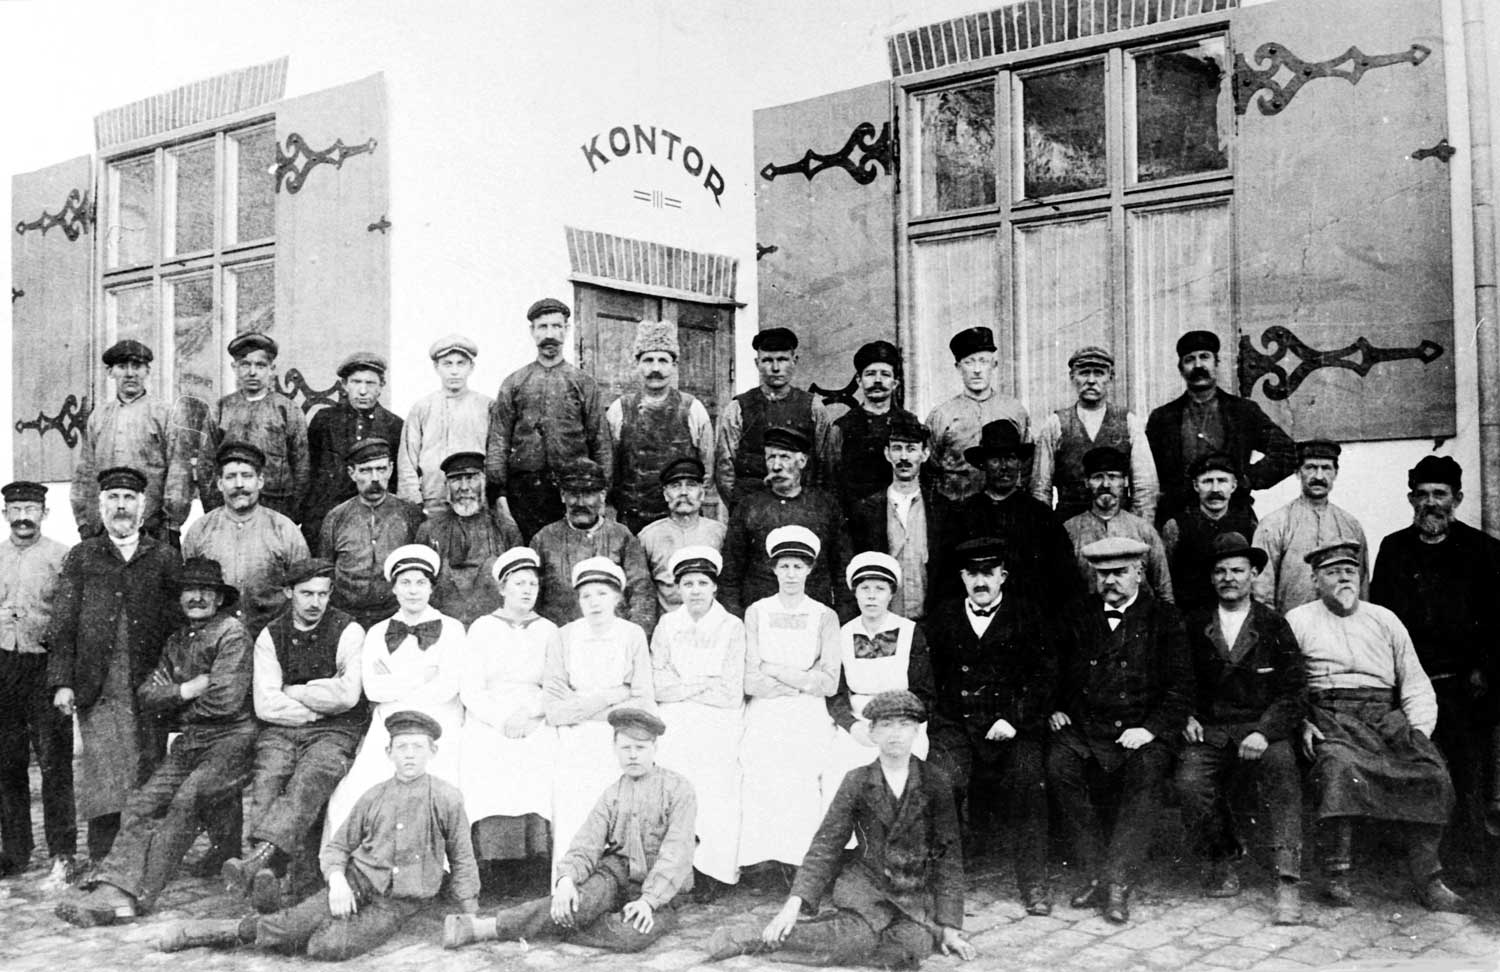 Jästbolaget's staff in the early 1900s